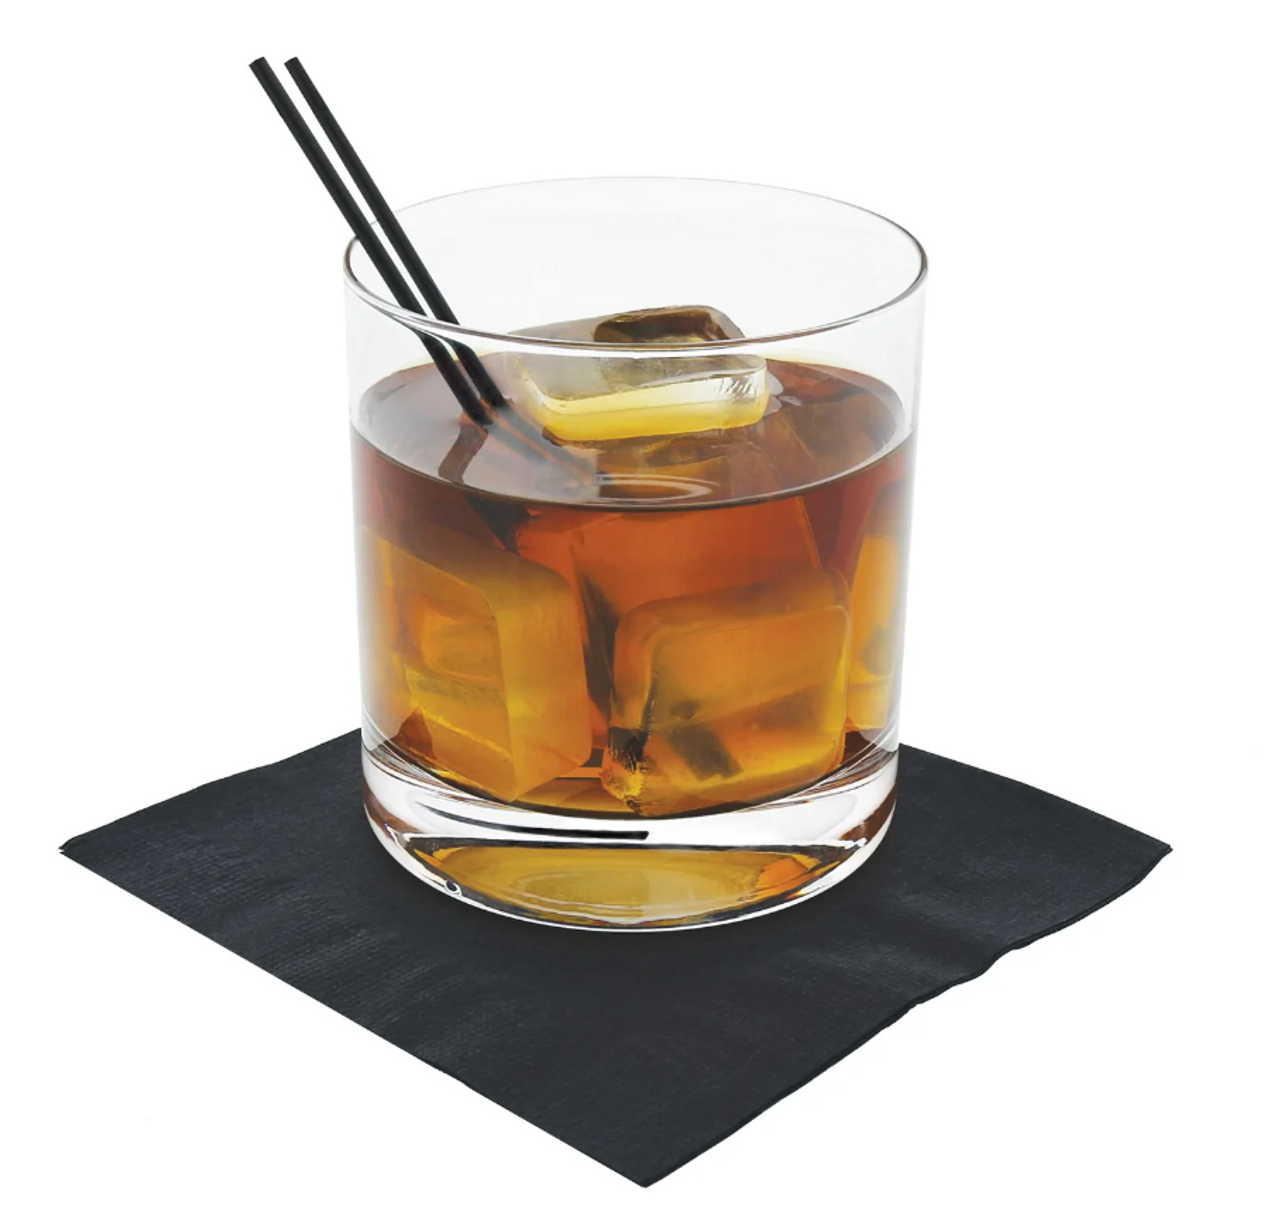 https://cdn11.bigcommerce.com/s-42uukcbhz8/images/stencil/1280x1280/products/152/2720/black_cocktail_napkin_new__90078.1659495321.PNG?c=2